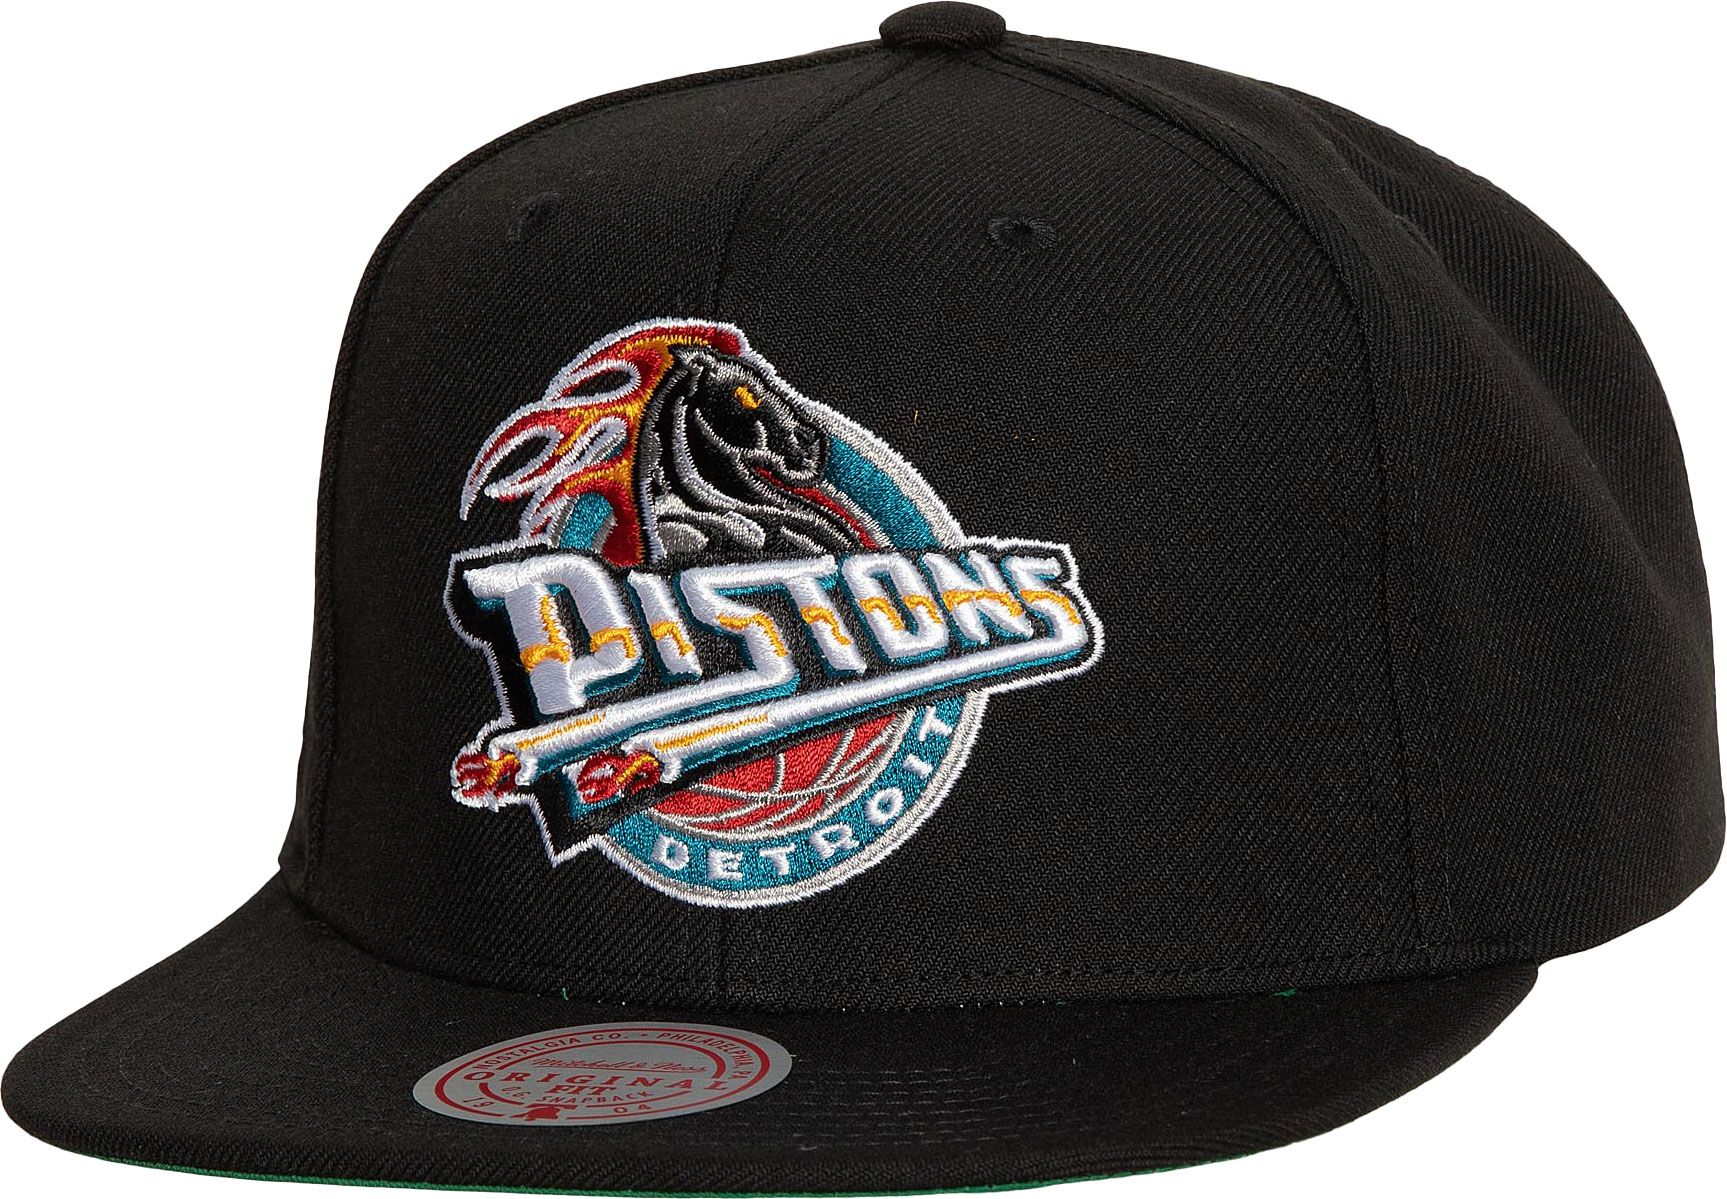 MITCHELL & NESS MITCHELL AND NESS ADULT DETROIT PISTONS CONFERENCE PATCH ADJUSTABLE SNAPBACK HAT INTERNATIONAL SHIPPING